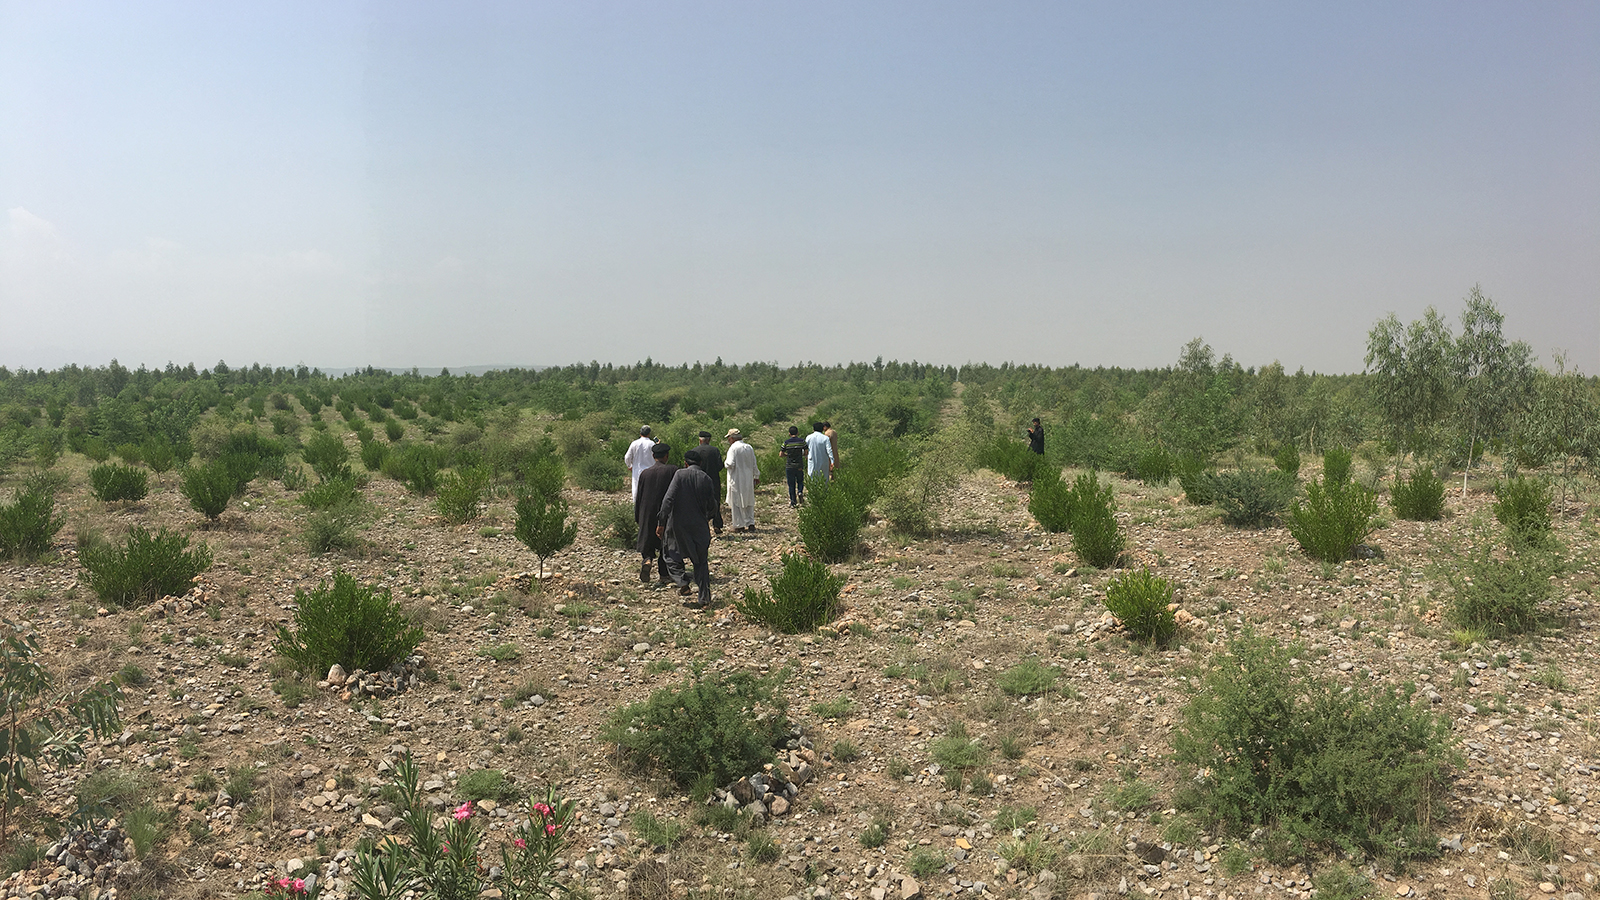 KP is almost done planting one billion trees. Are the other provinces up for the challenge?